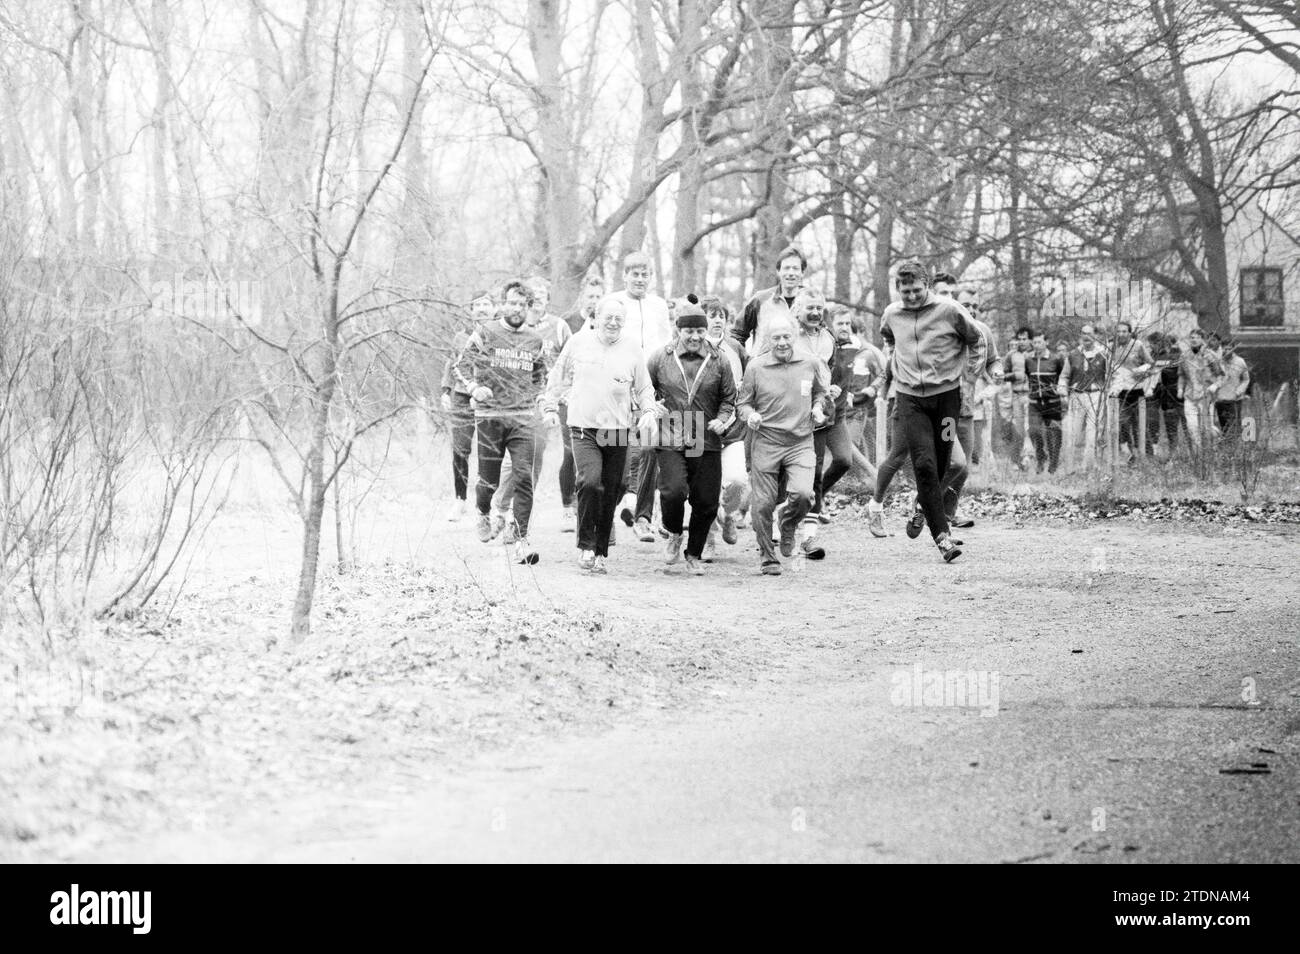 Marathon runners at the 'Oase', Vogelenzang, Vogelenzang, 1e Leijweg, 07-04-1986, Whizgle News from the Past, Tailored for the Future. Explore historical narratives, Dutch The Netherlands agency image with a modern perspective, bridging the gap between yesterday's events and tomorrow's insights. A timeless journey shaping the stories that shape our future Stock Photo